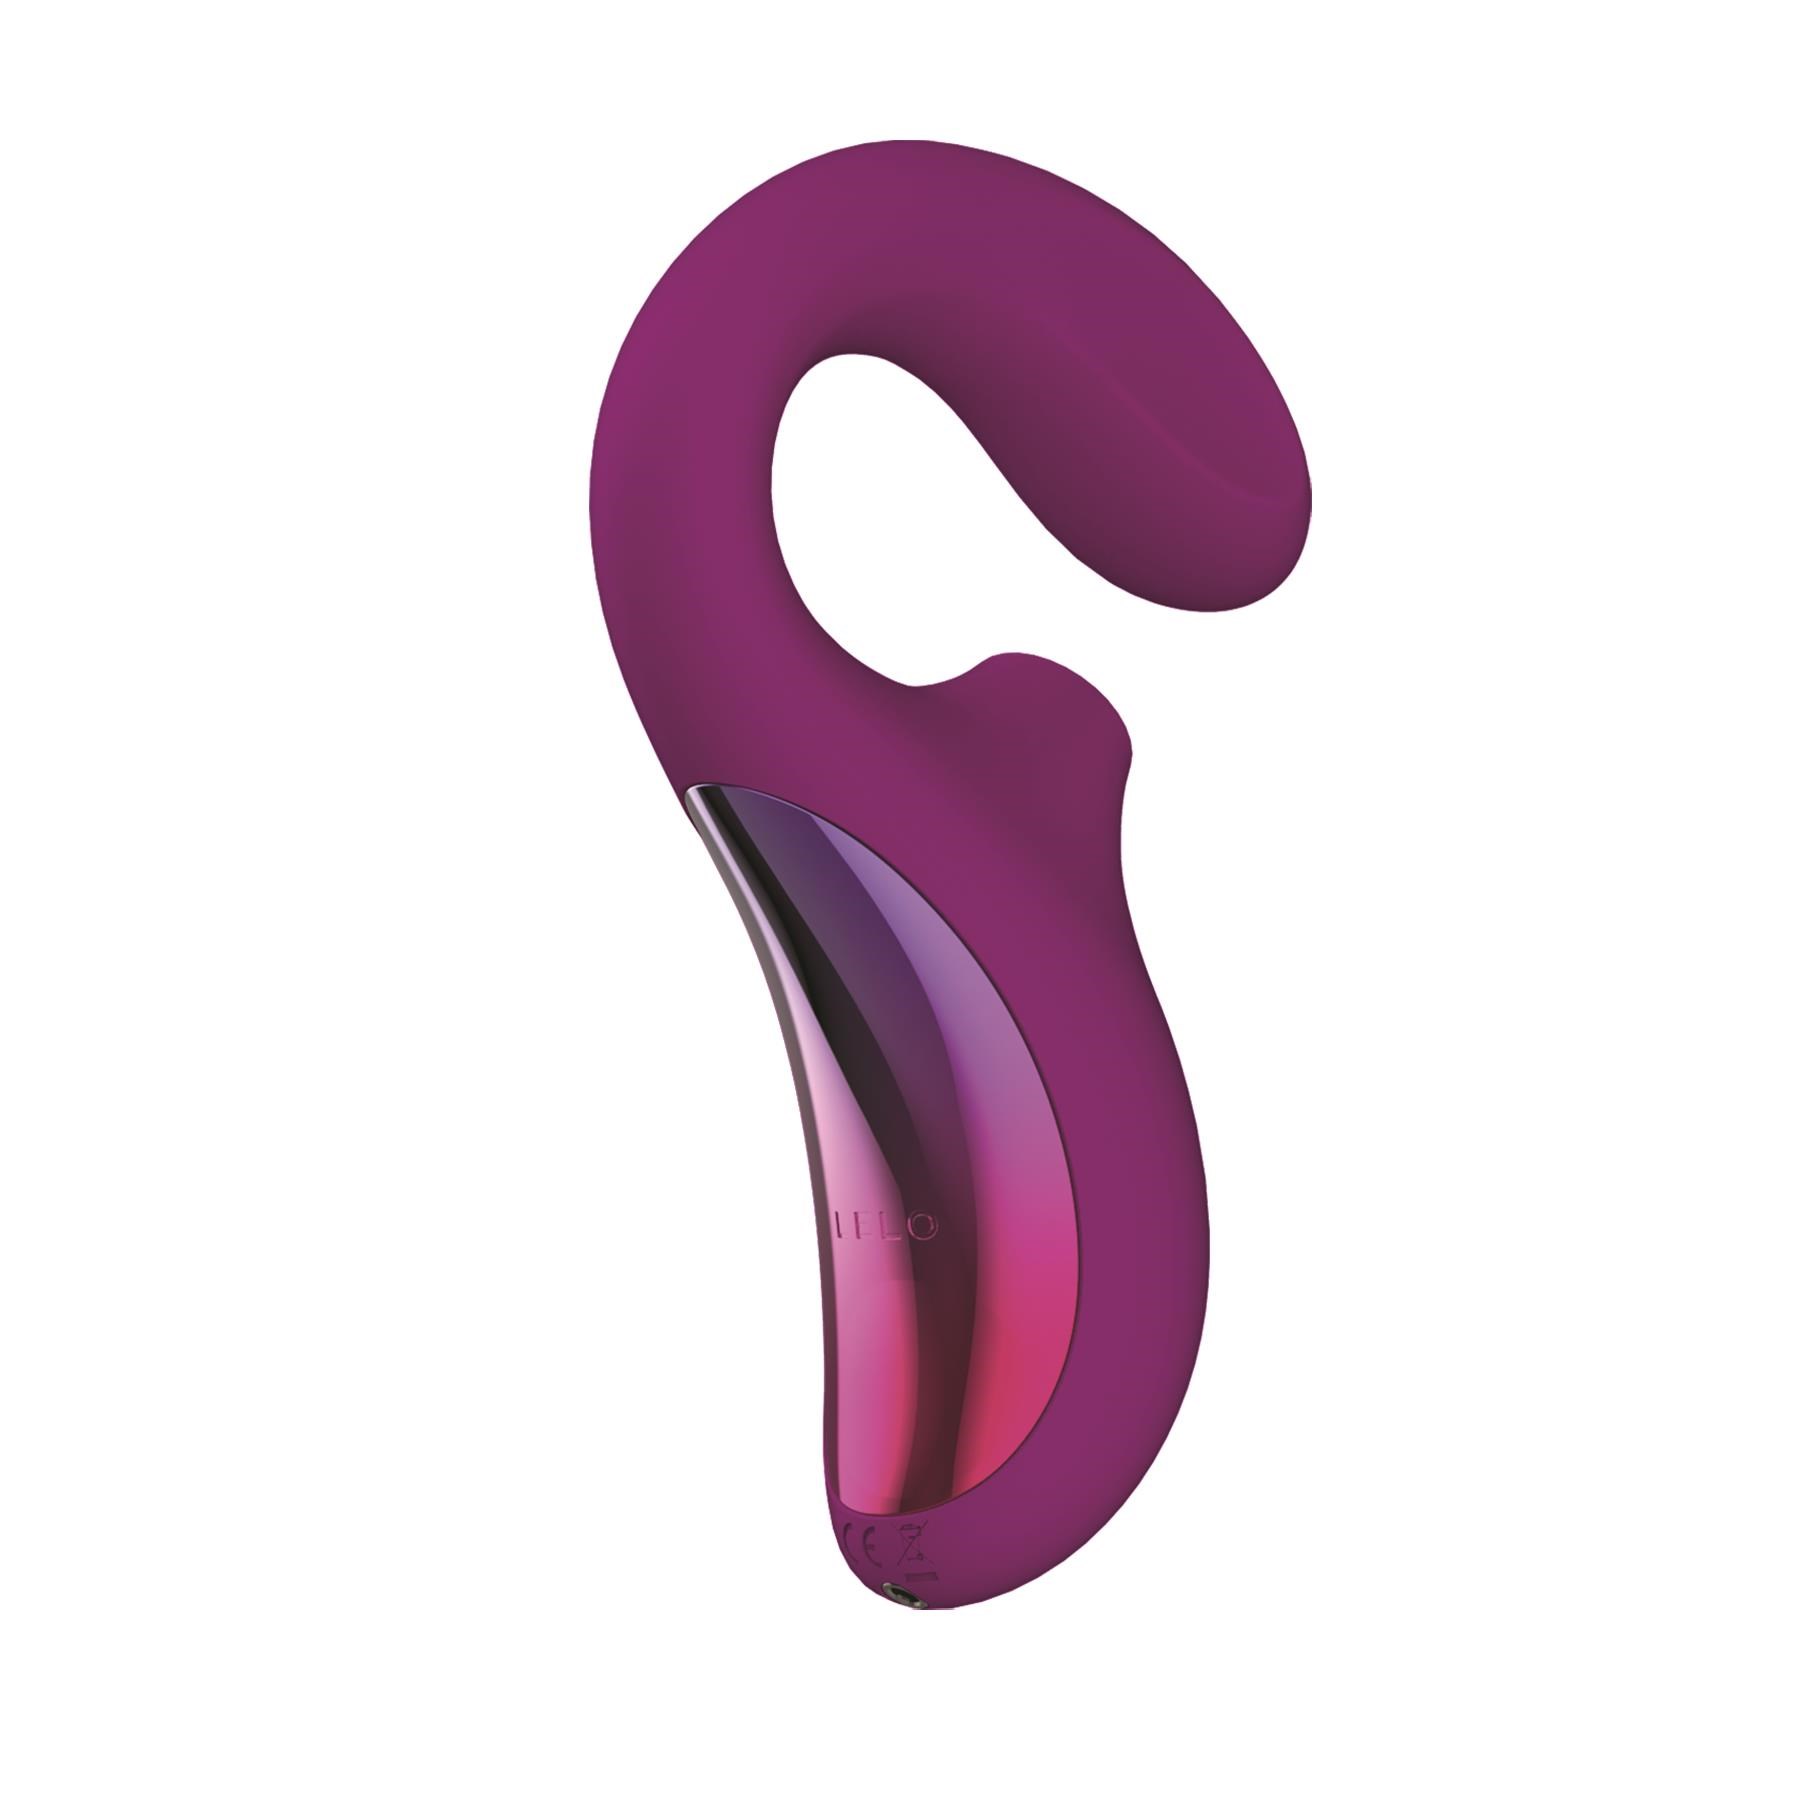 Lelo Enigima Dual Action Sonic Massager Product Shot Showing side and Back